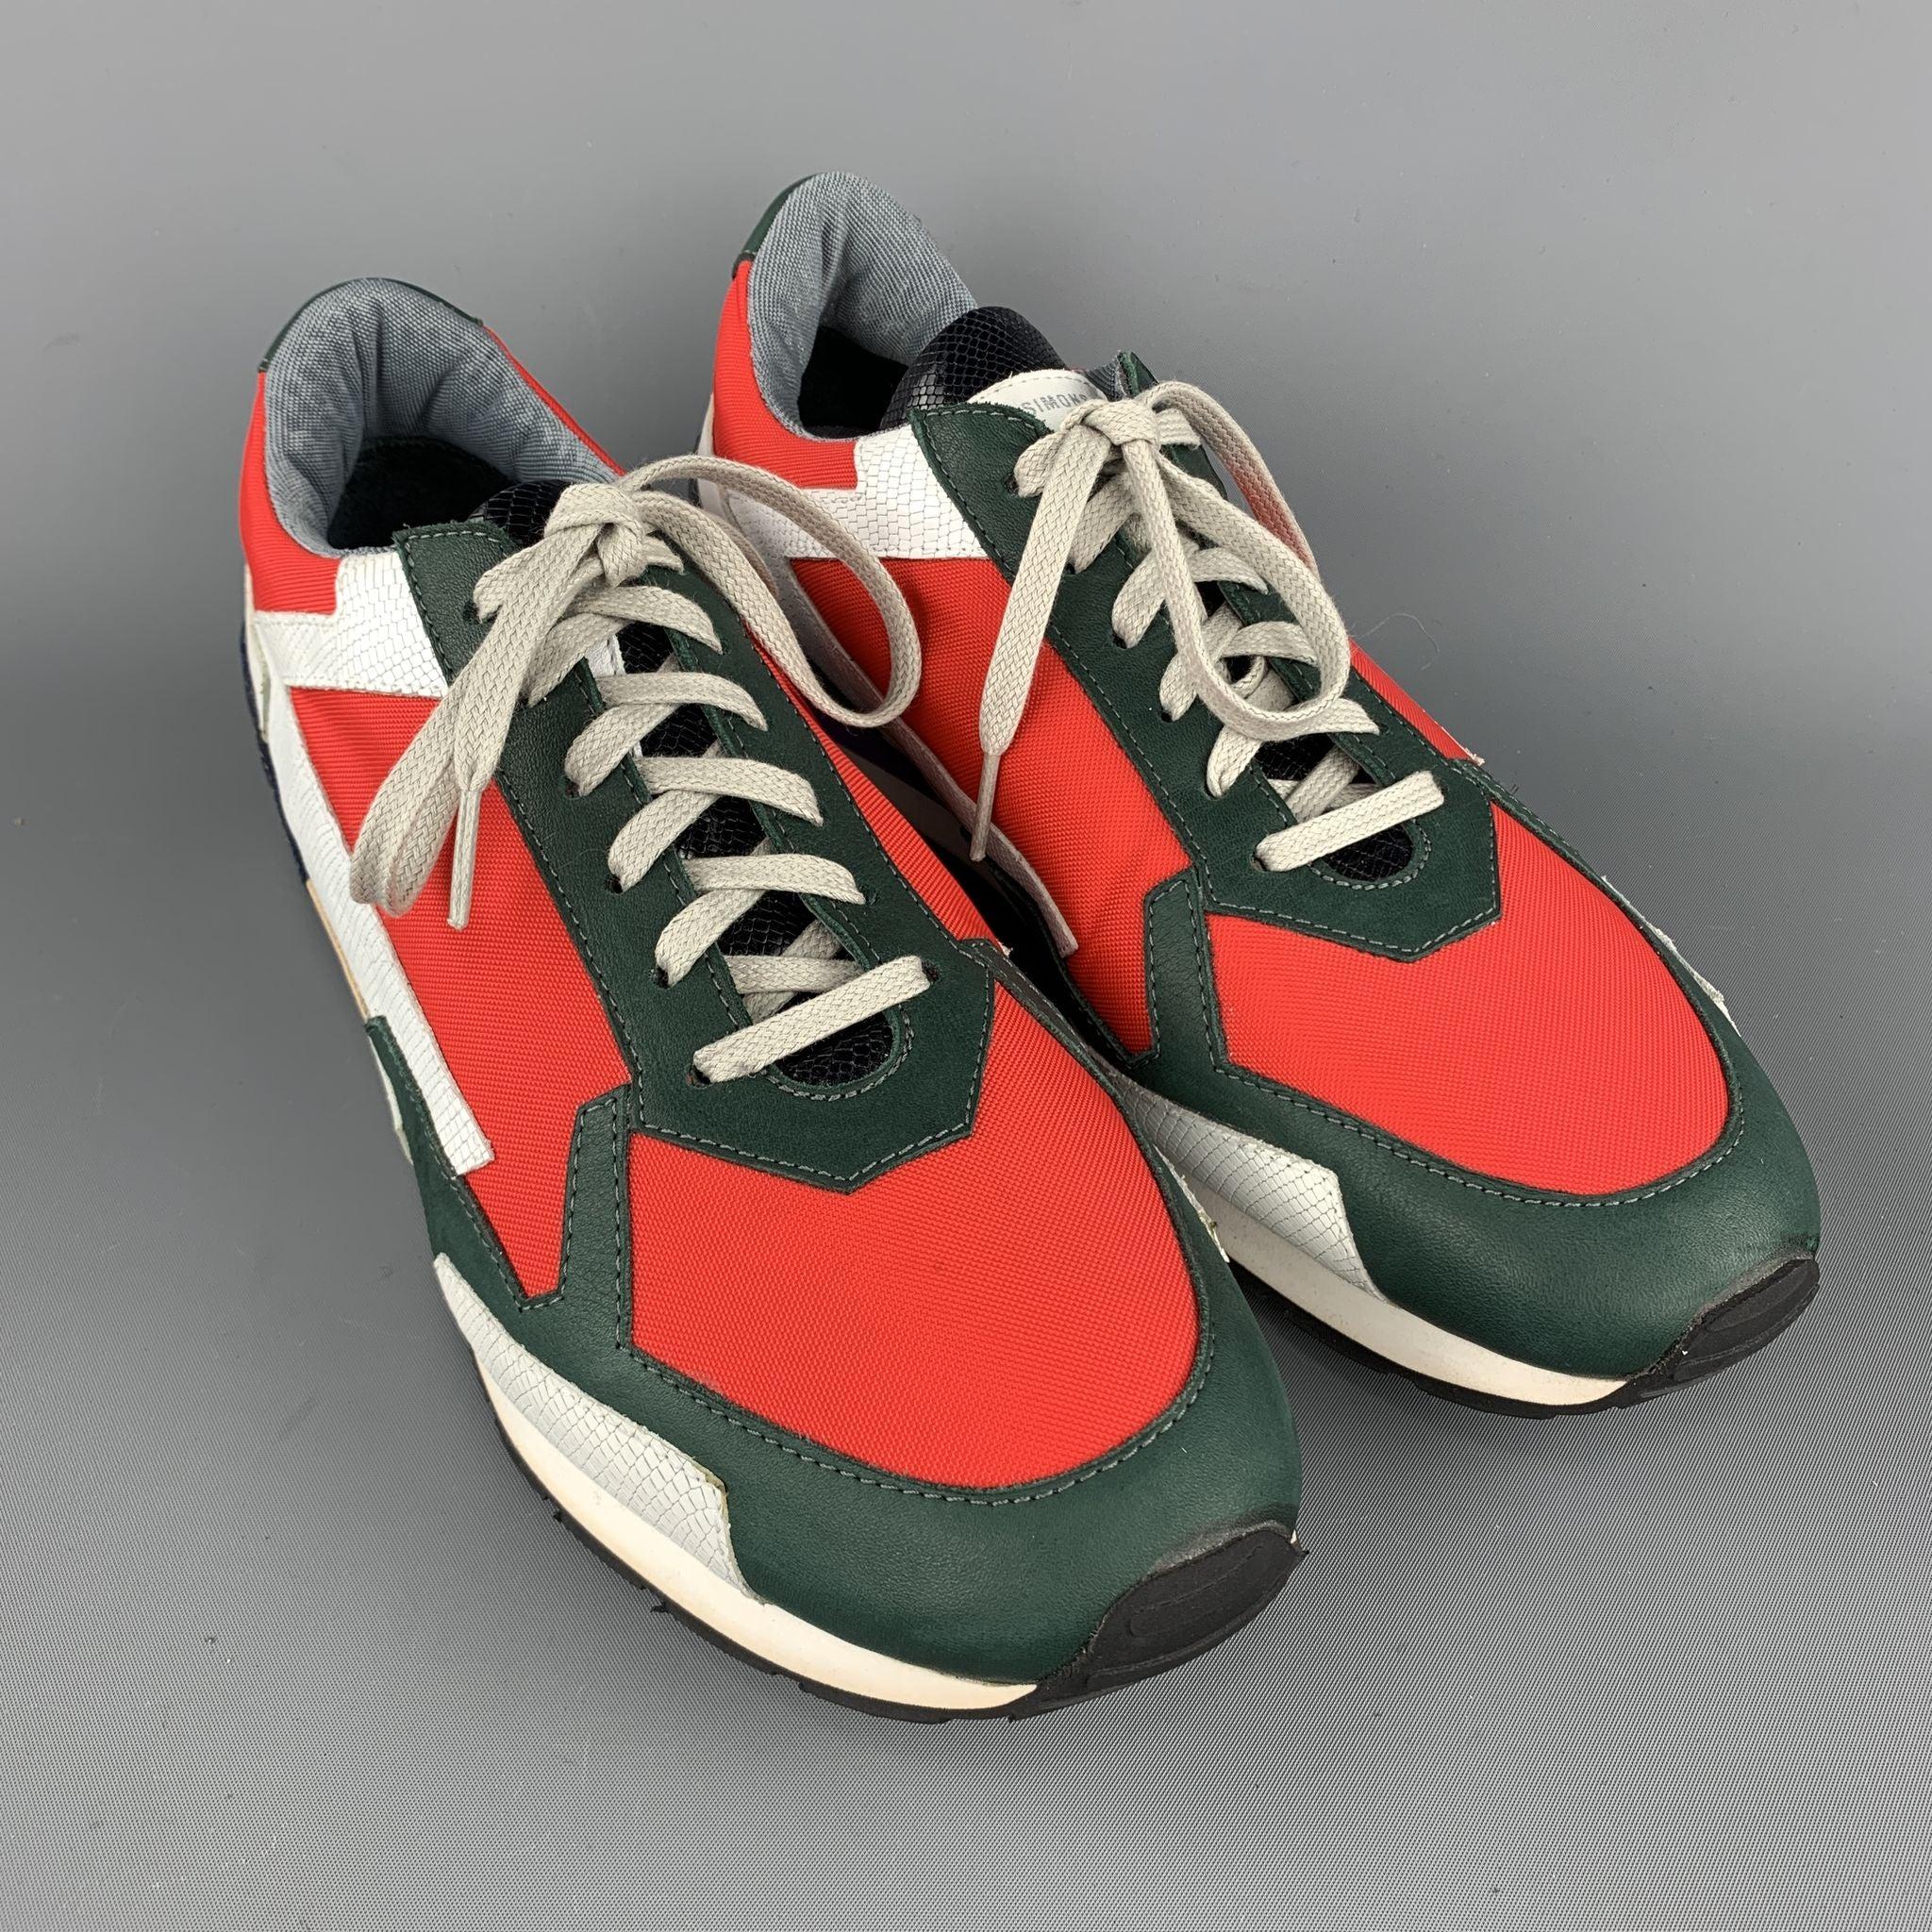 RAF SIMONS sneakers comes in a multi-color nylon featuring black and white leather trim details and a purple trim rubber sole. Made in Italy.Very Good Pre-Owned Condition. 

Marked:   43 

Measurements: 
  Outsole: 11.5 in x 4 inches 
  
  
